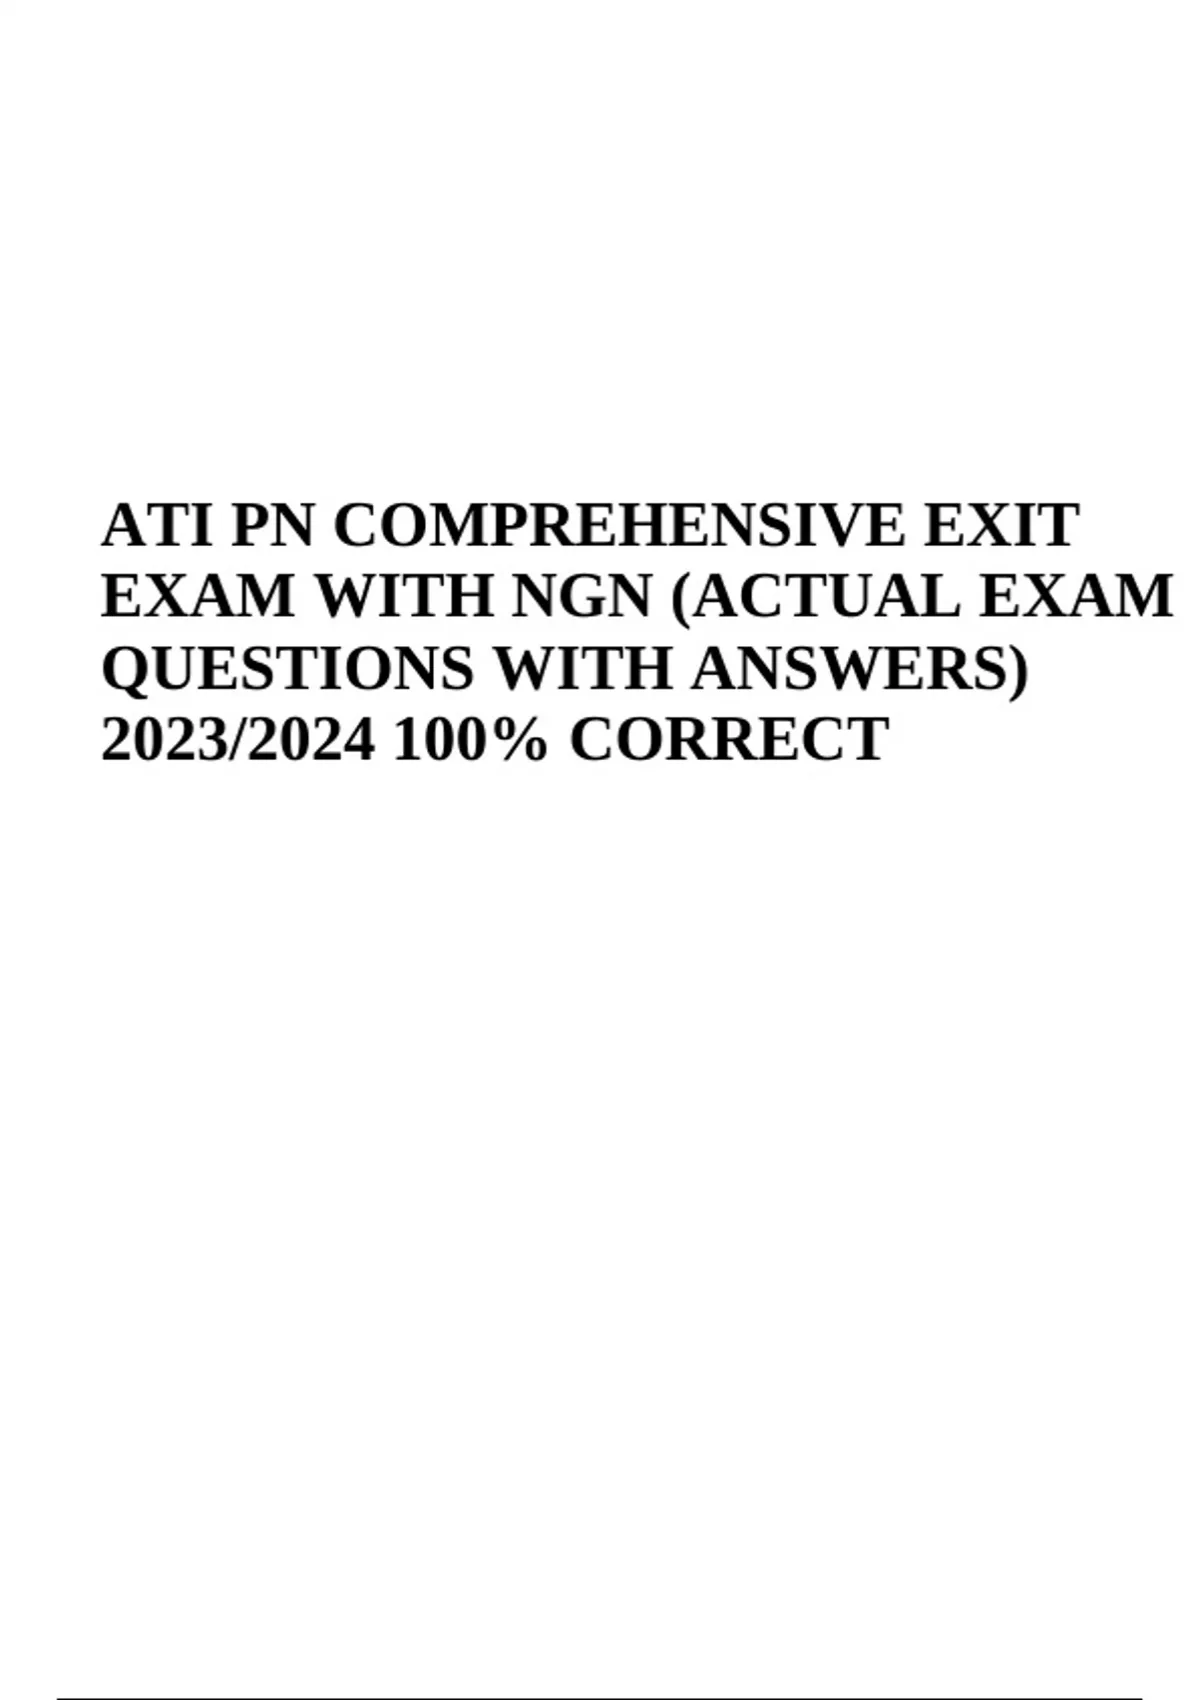 ATI PN COMPREHENSIVE EXIT EXAM WITH NGN 2023/2024 (ACTUAL EXAM